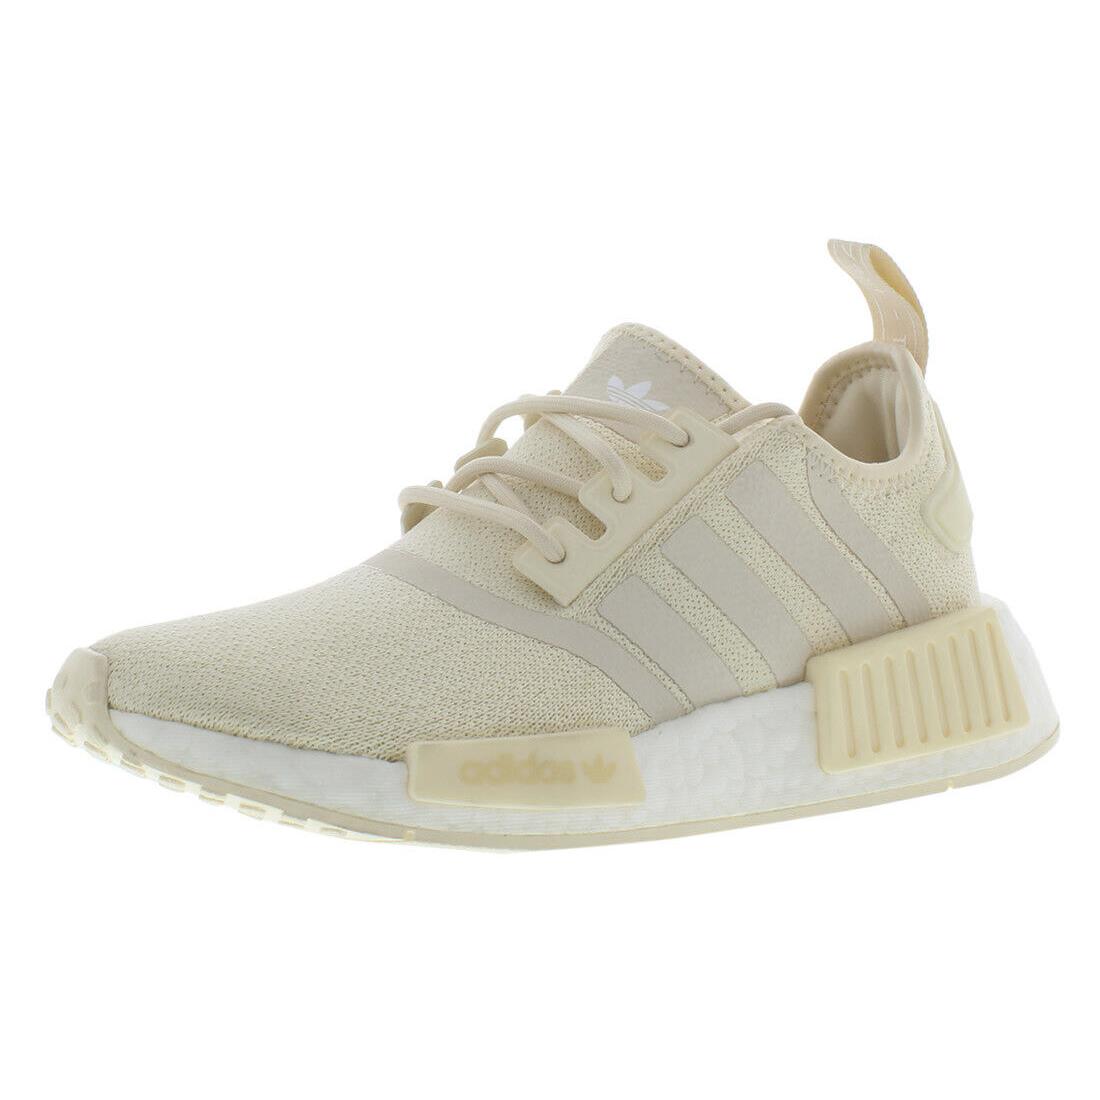 Adidas NMD_R1 Womens Shoes - Off White, Main: Off-White